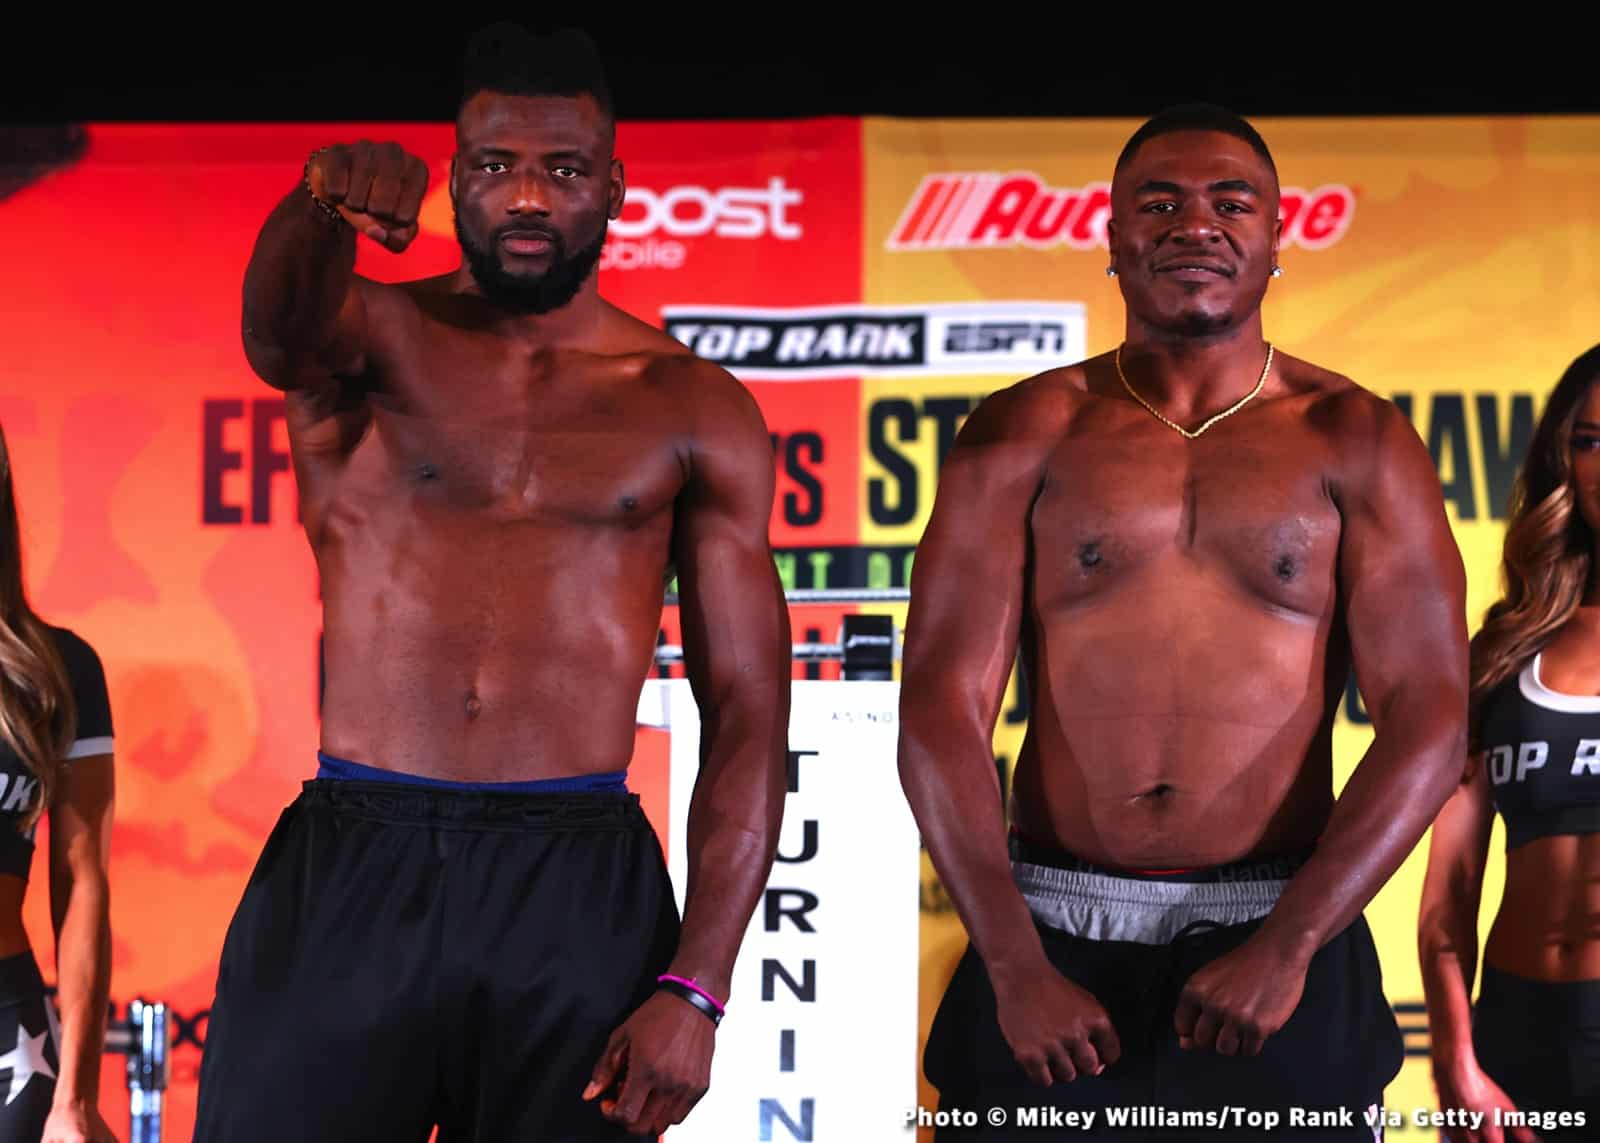 Weights: Efe Ajagba 235 1/4 vs. Stephan Shaw 239.5